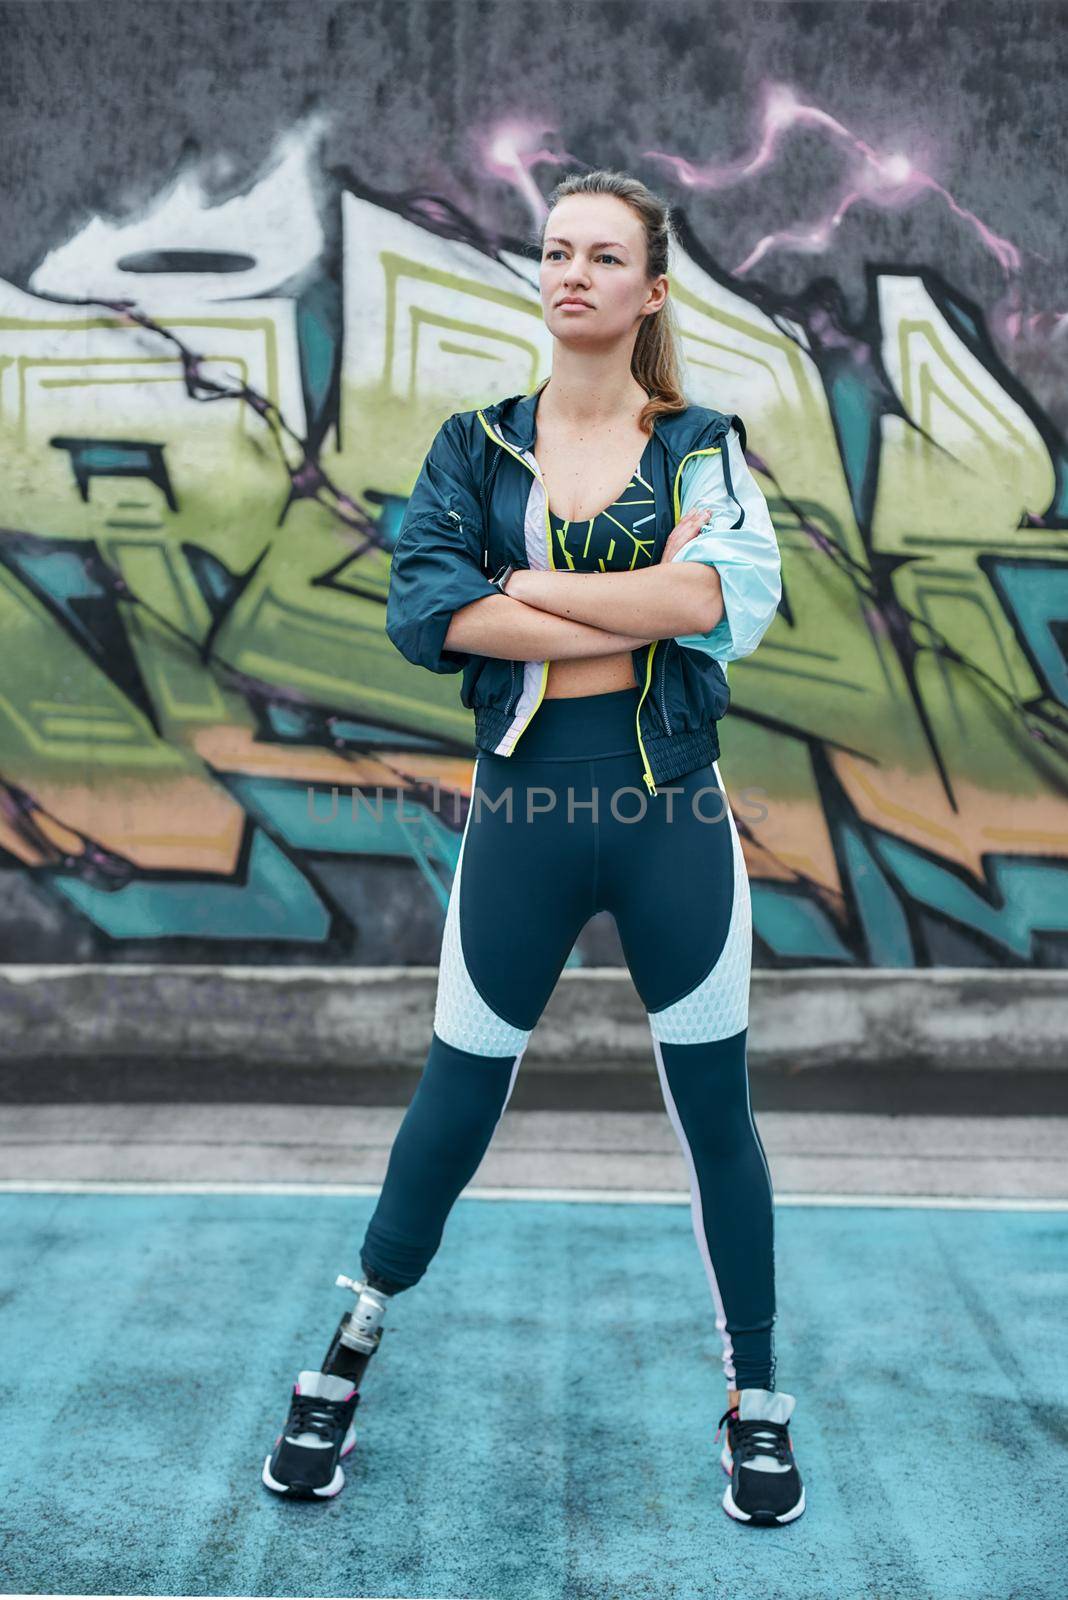 Never give up Disabled woman in sport wear with leg prosthesis standing outdoors and keeping arms crossed. by friendsstock